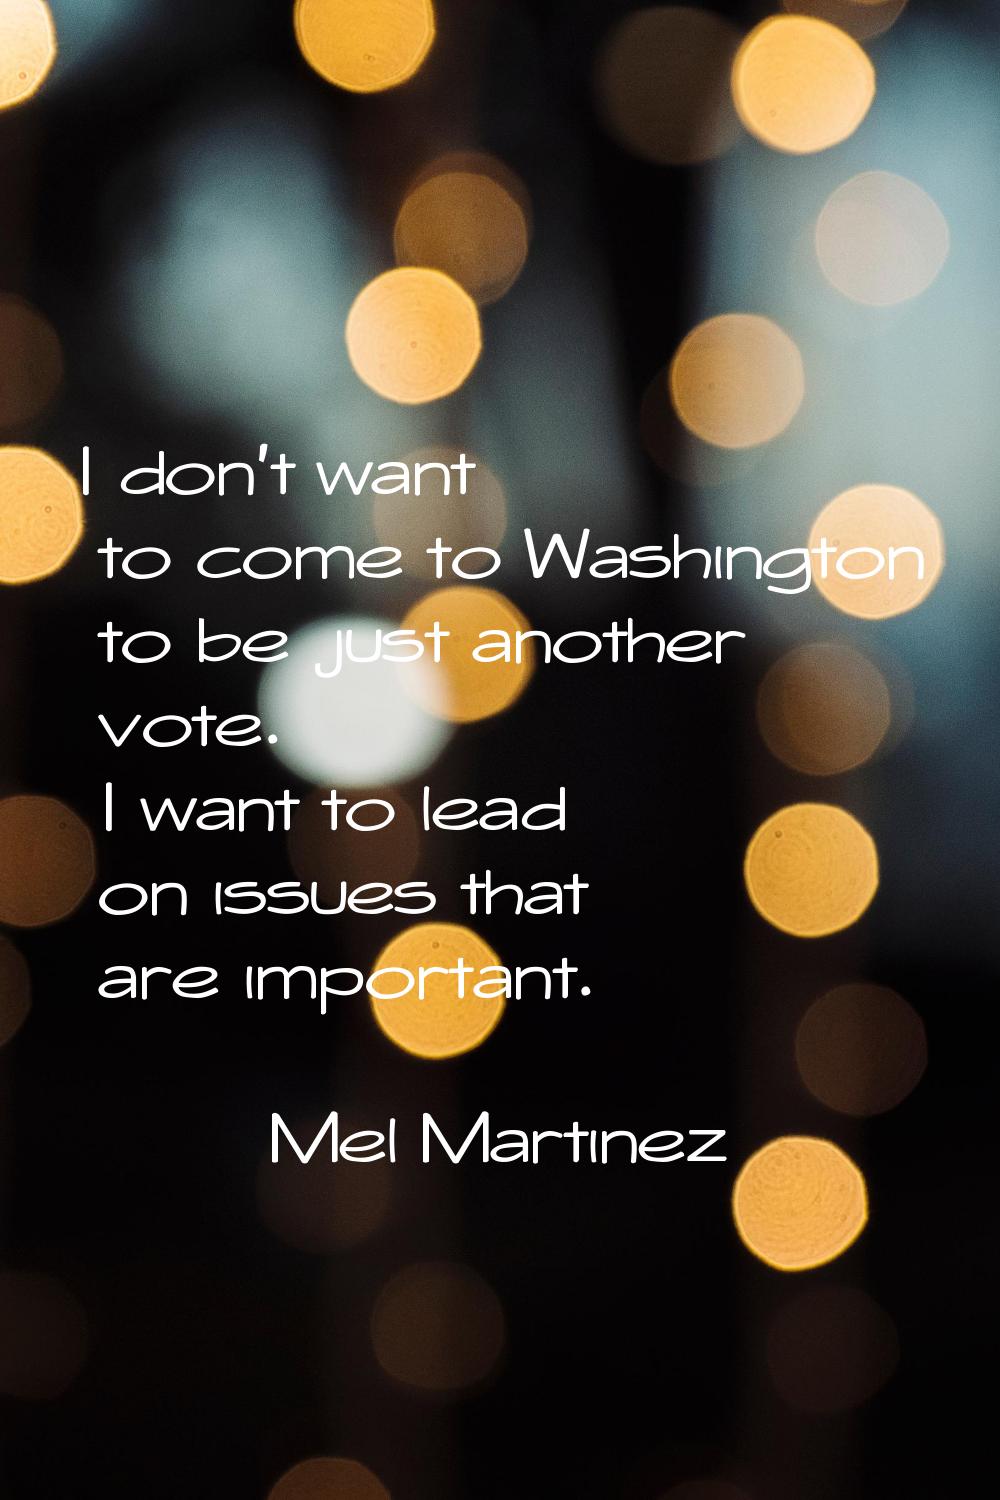 I don't want to come to Washington to be just another vote. I want to lead on issues that are impor